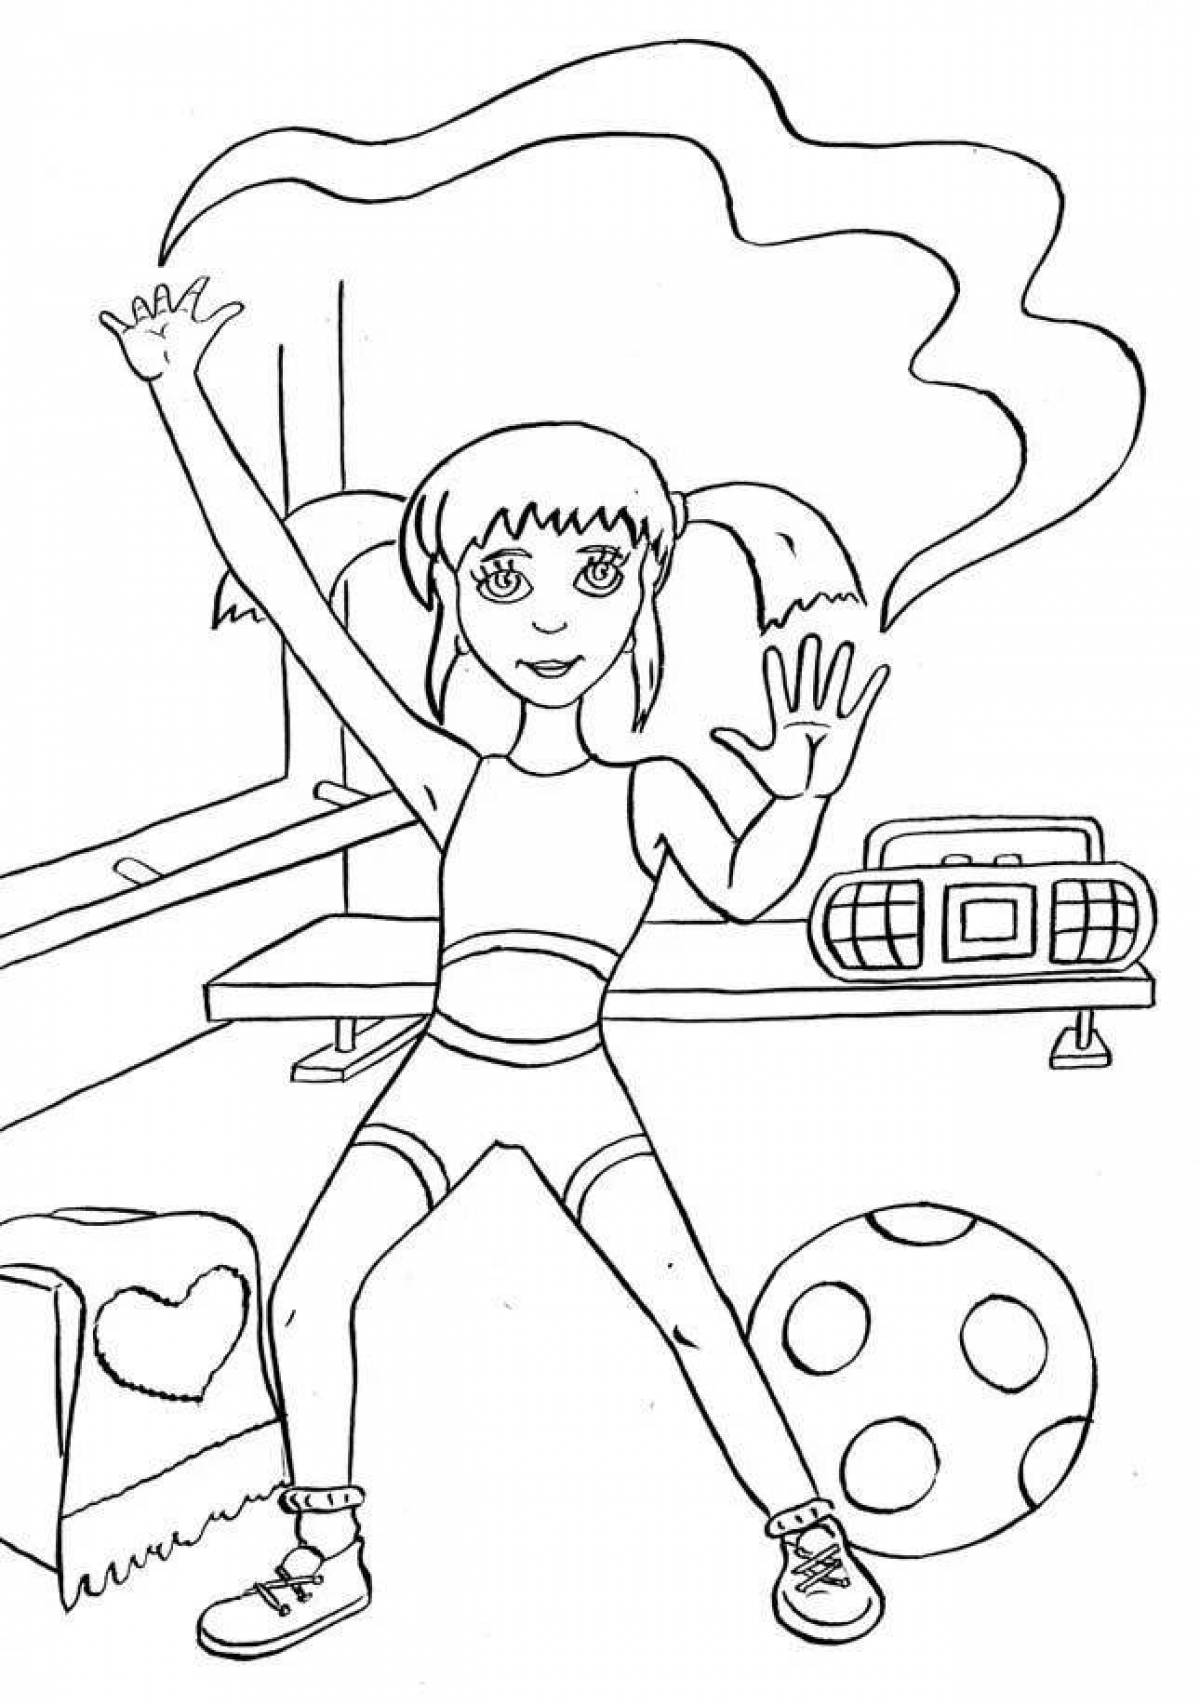 Vibrant Lifestyle Coloring Page